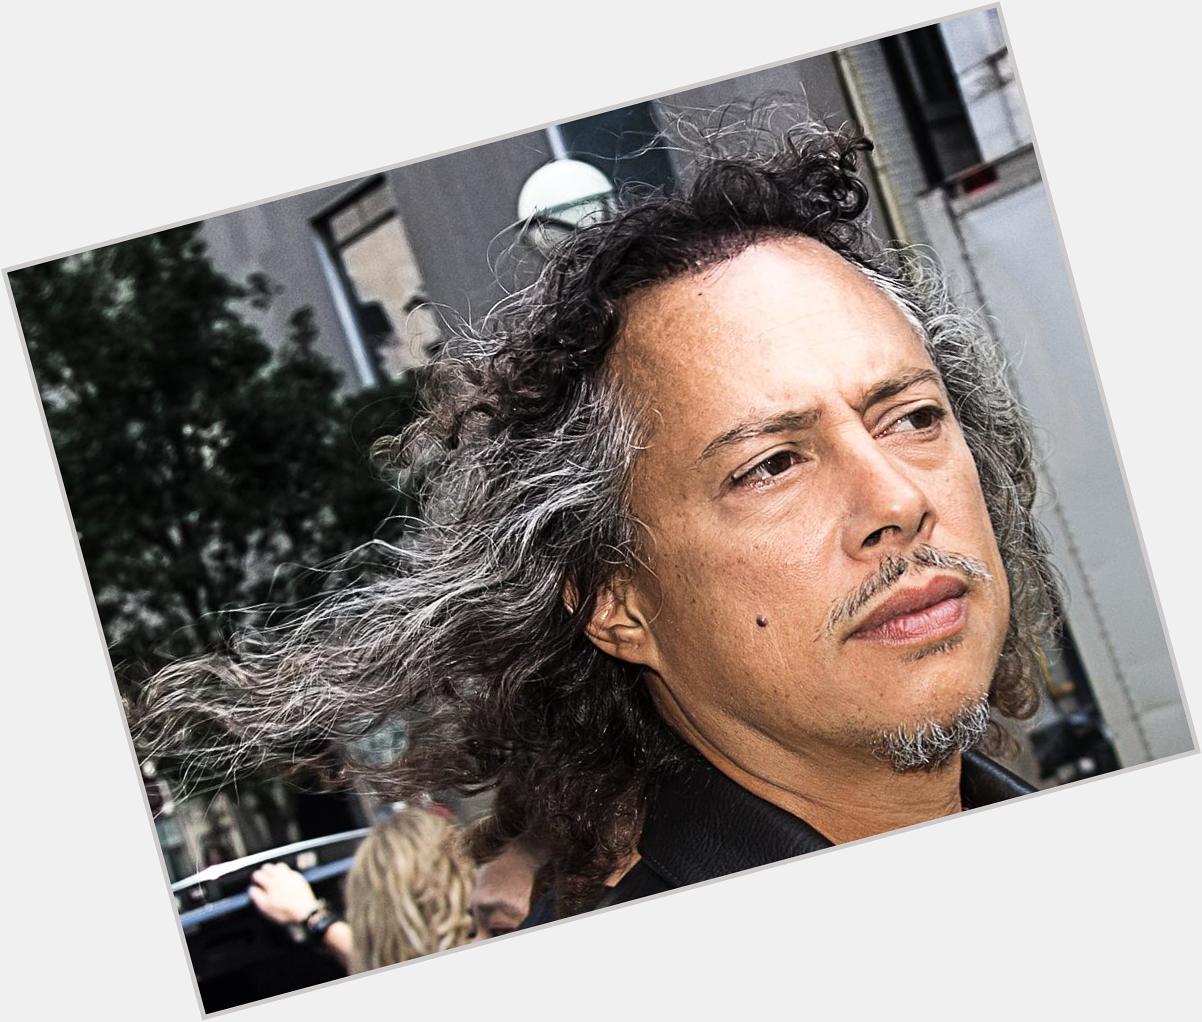 Happy 52nd birthday, Kirk Hammett, awesome lead guitarist for Metallica  "I Disappear" 